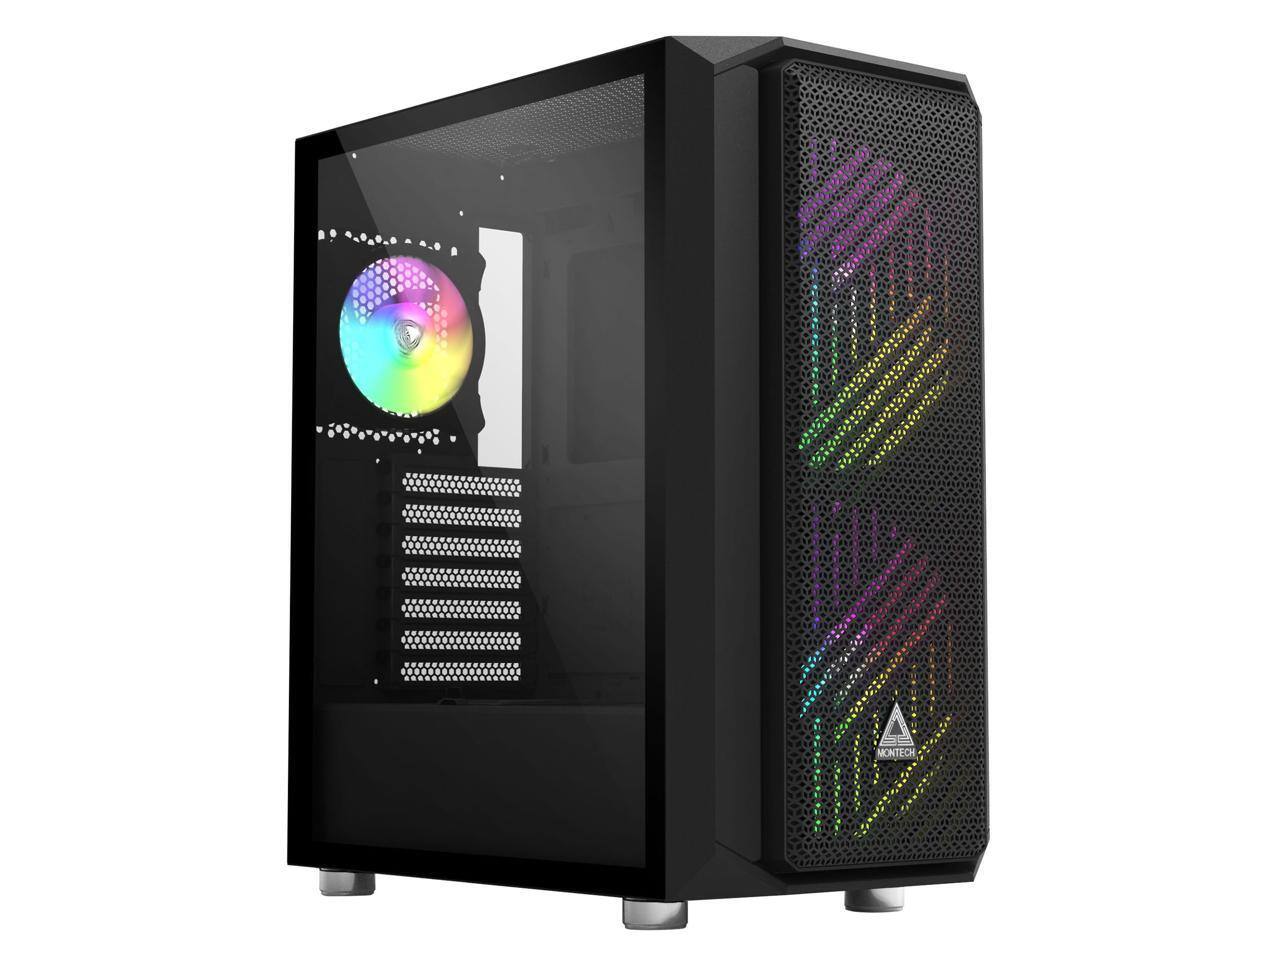 Montech Air X ARGB - Black ATX Mid-Tower Gaming Case (plus $10 Newegg Gift Card) for $59.99 w/ FS